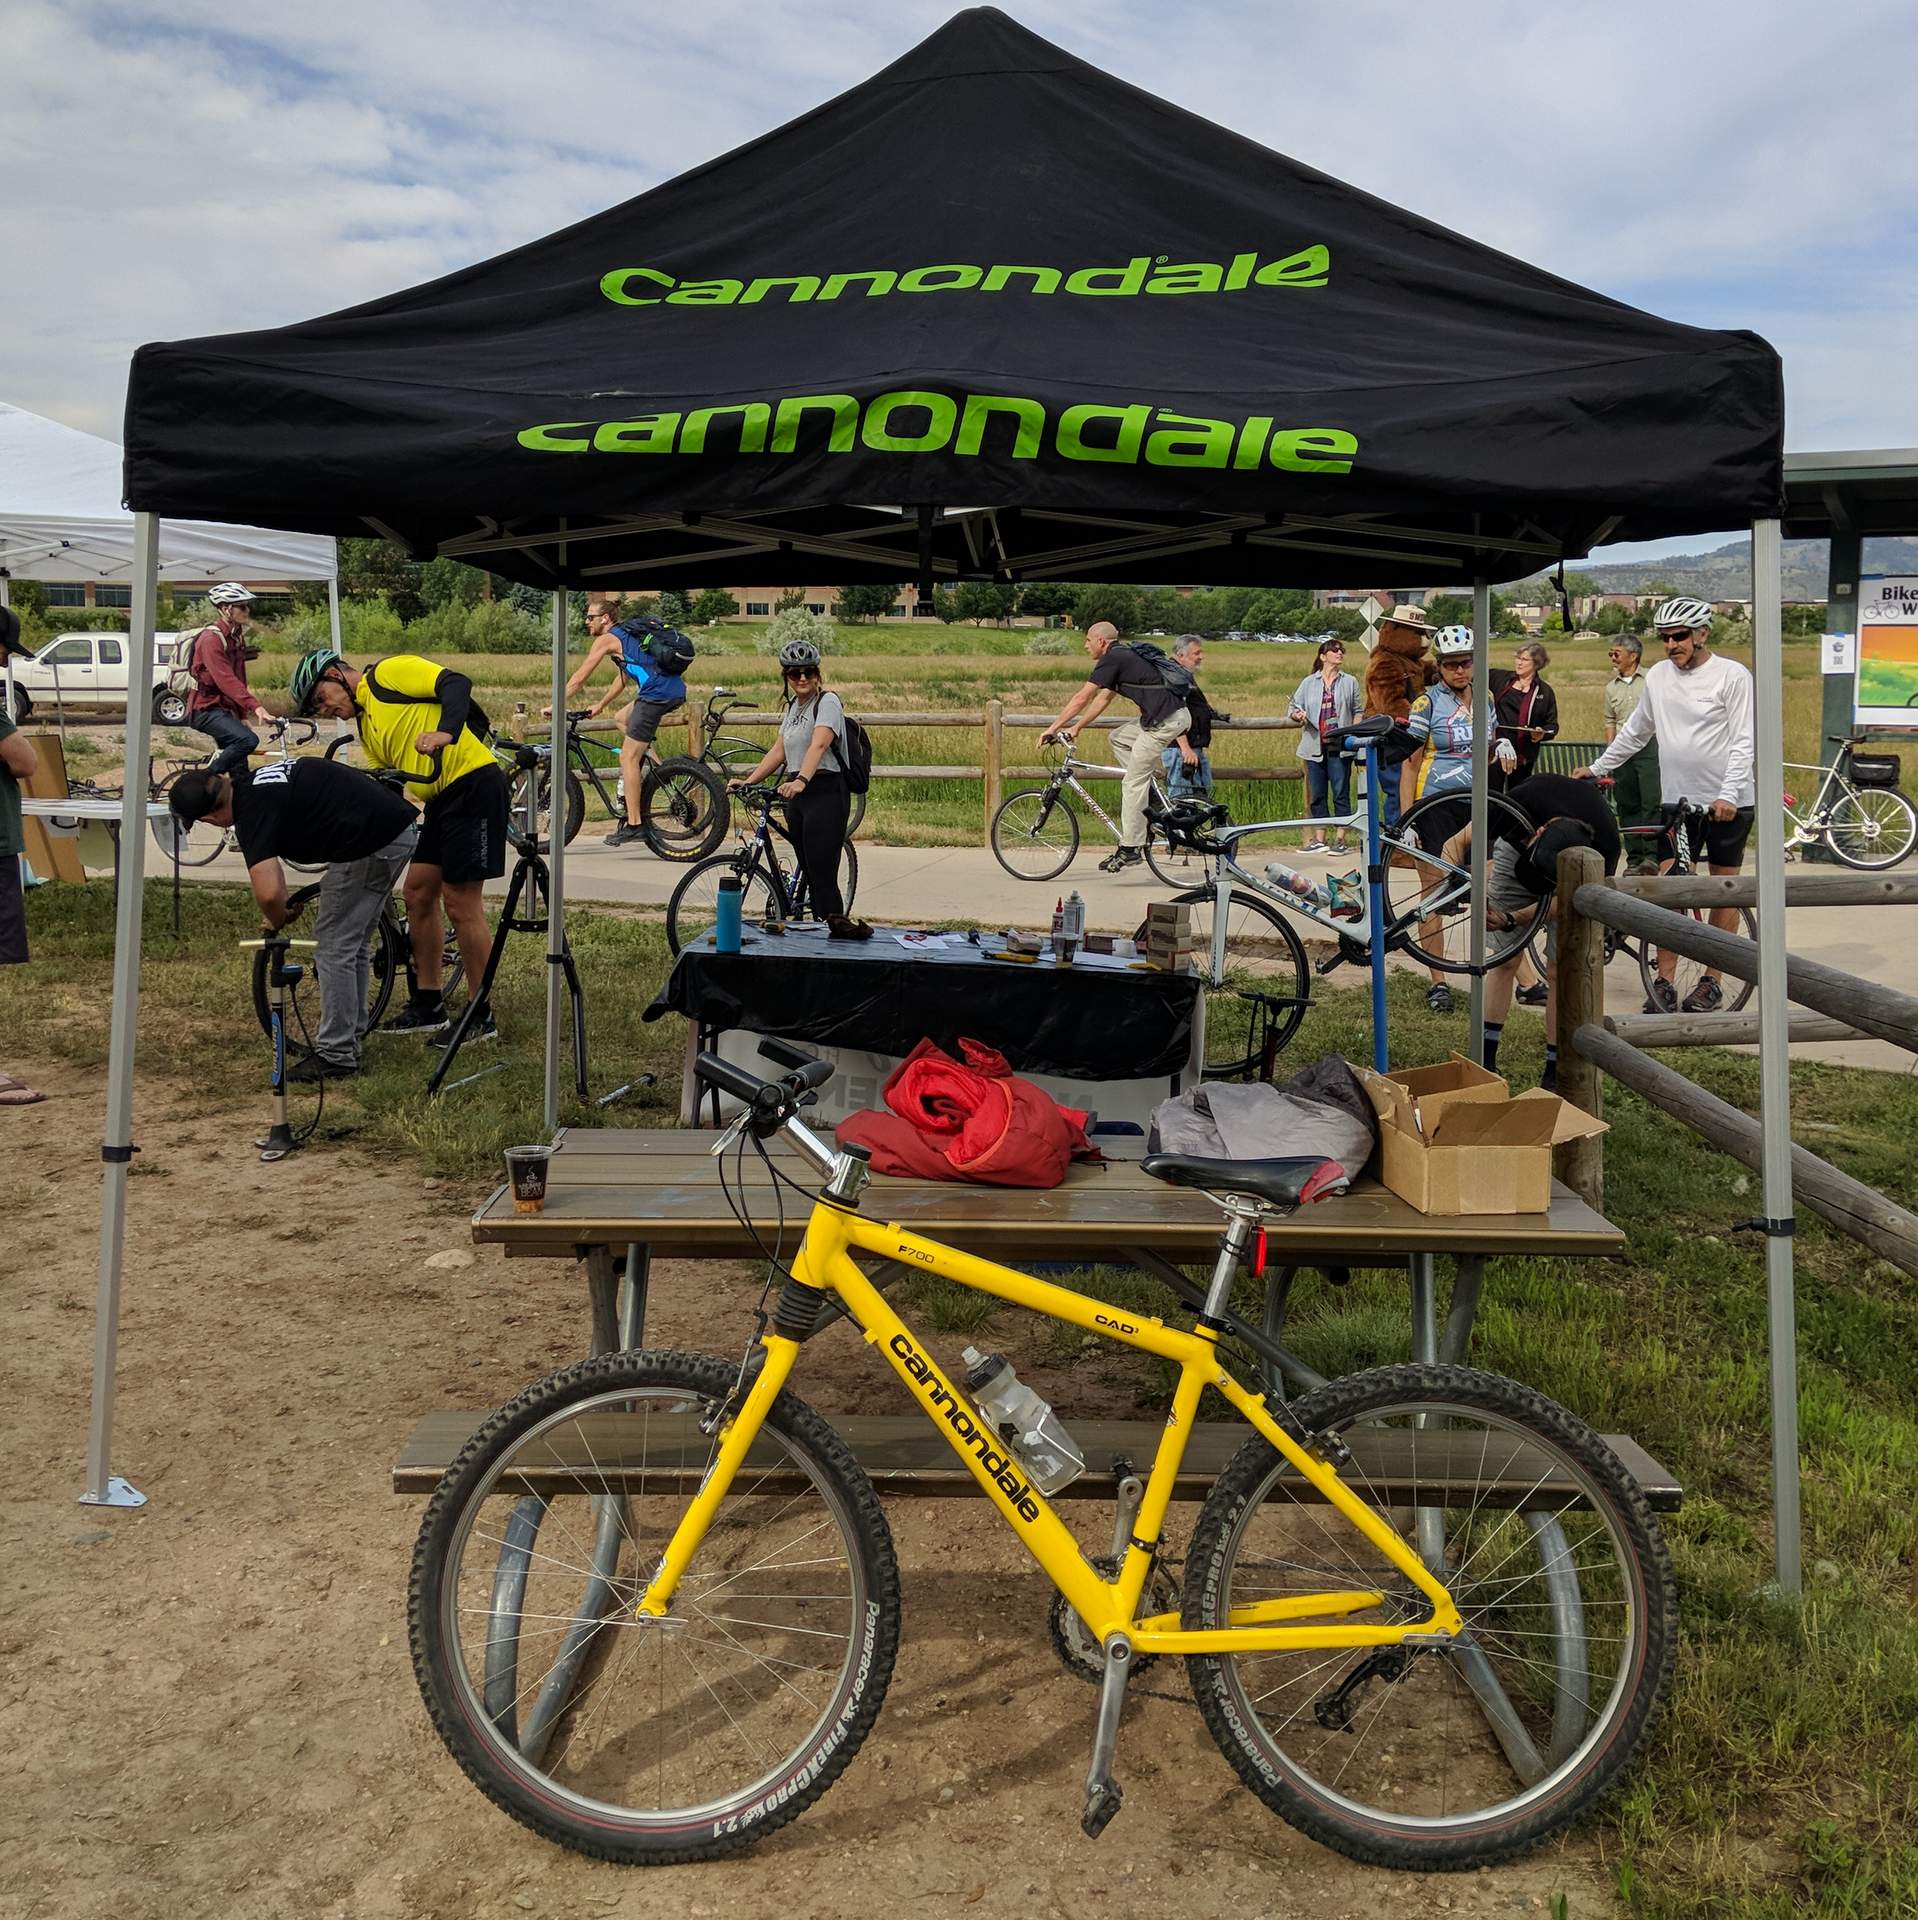 My yellow 1996 Cannondale F700 in front of a Cannondale tent.